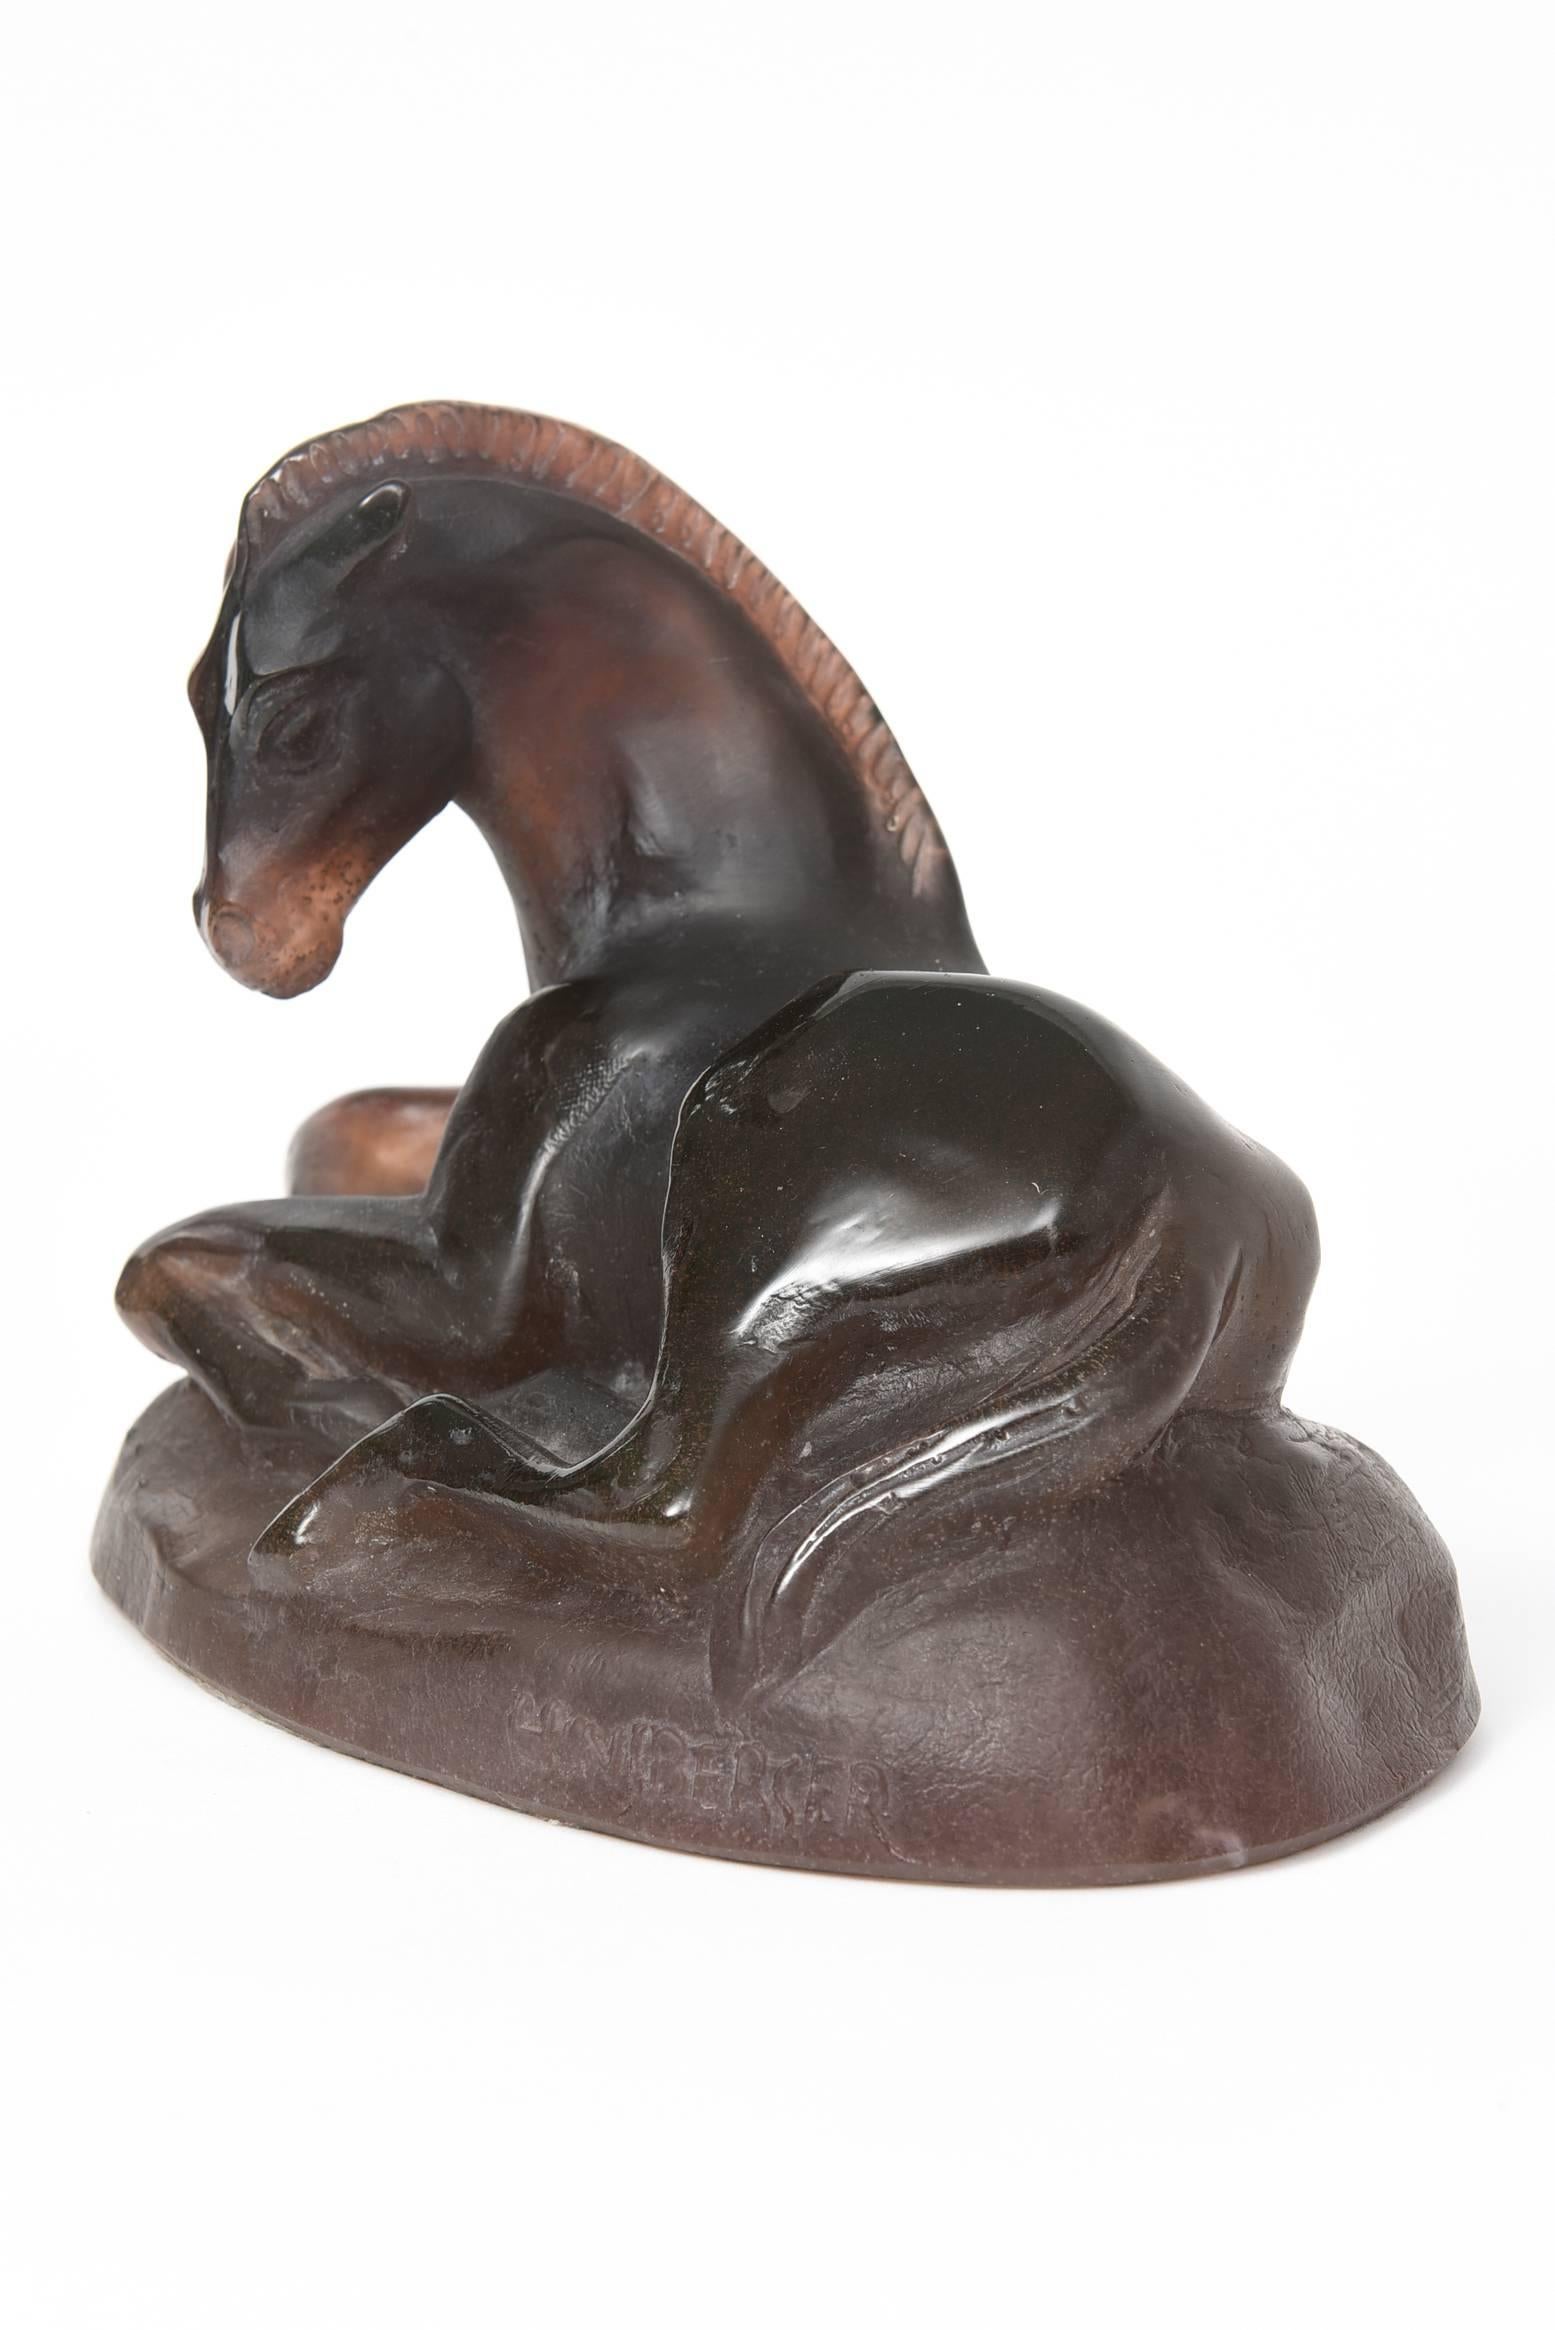 Pâte de verre resting foal designed by artist Alexis Hinsberger (1907-1966) for Daum Crystal. Marked: Daum France and Hinsberger. Limited edition #90 out of 300.